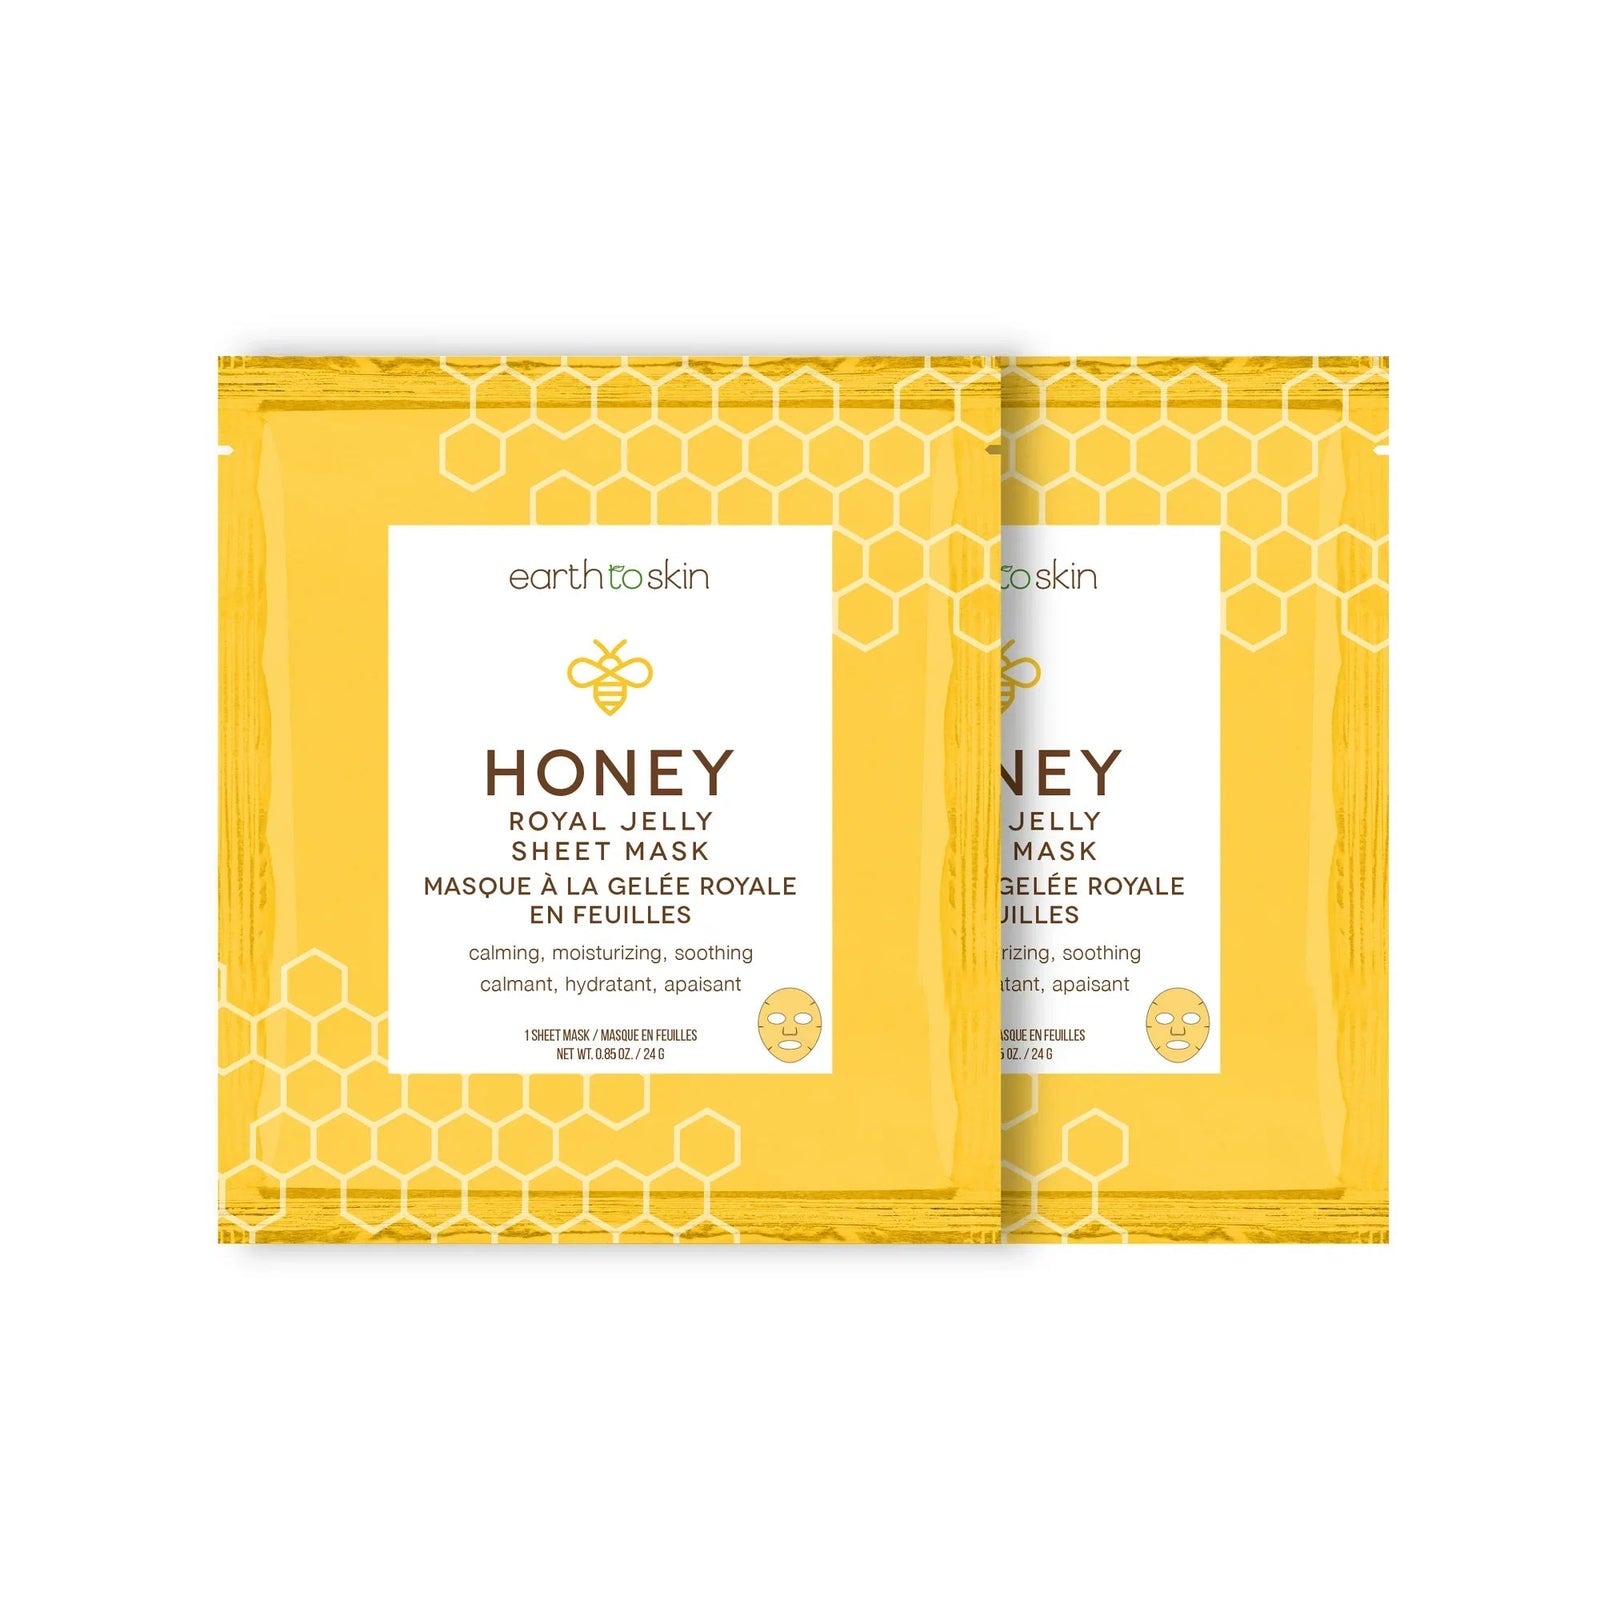 Multi-tasking Skincare: How to Get the Most Out of Your Royal Jelly Sheet Mask